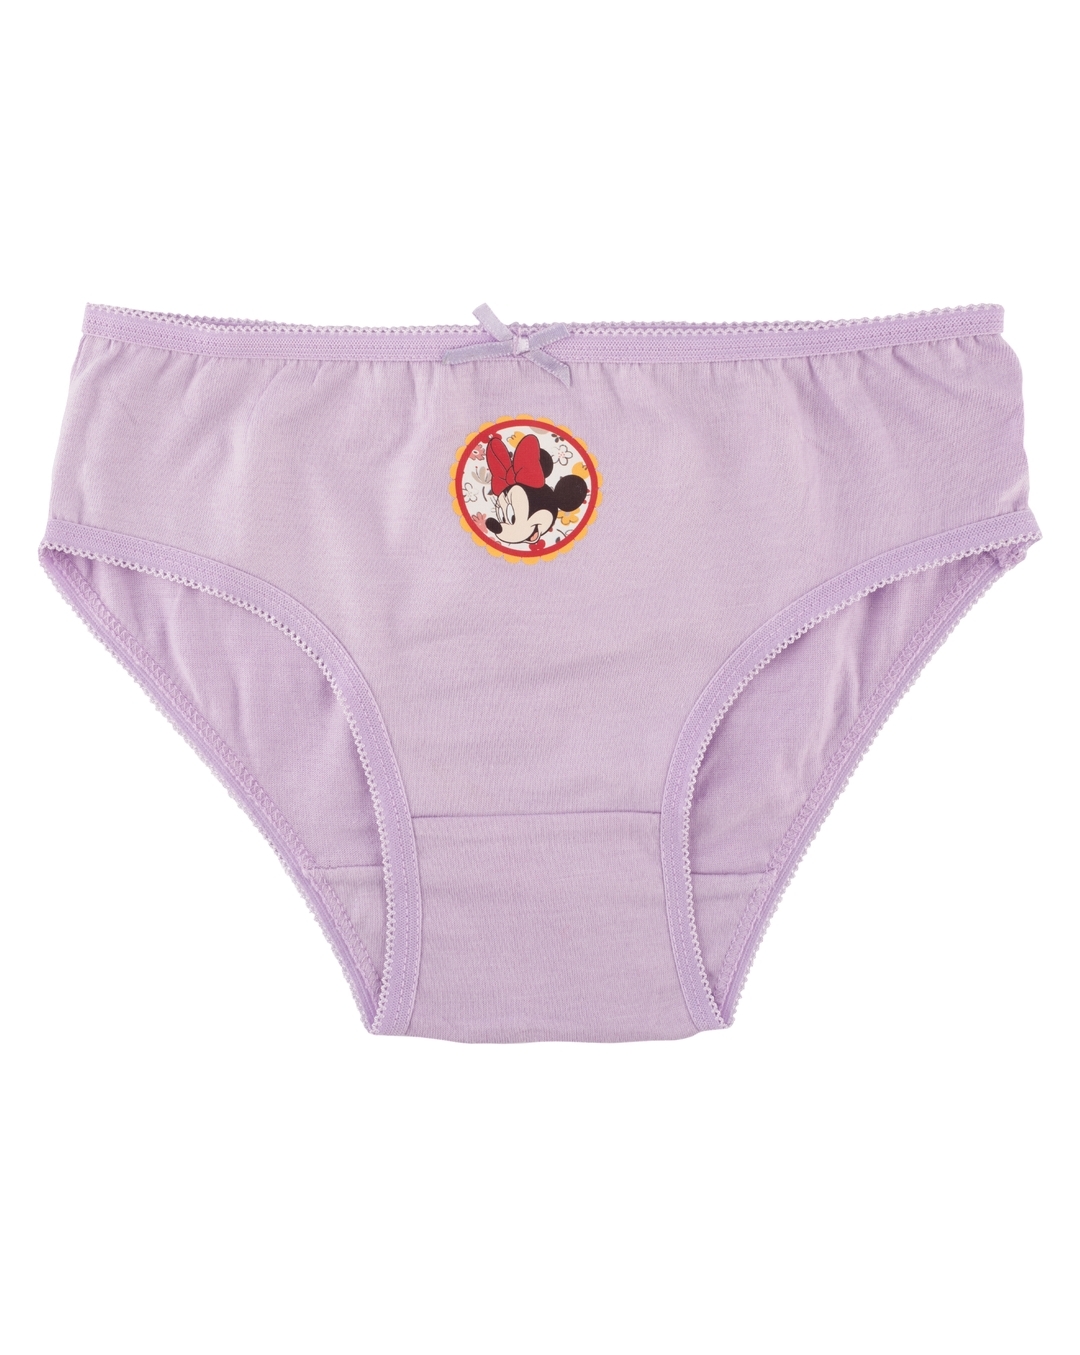 Buy Minnie Mouse Girls Panties PO3 Online at Best Price